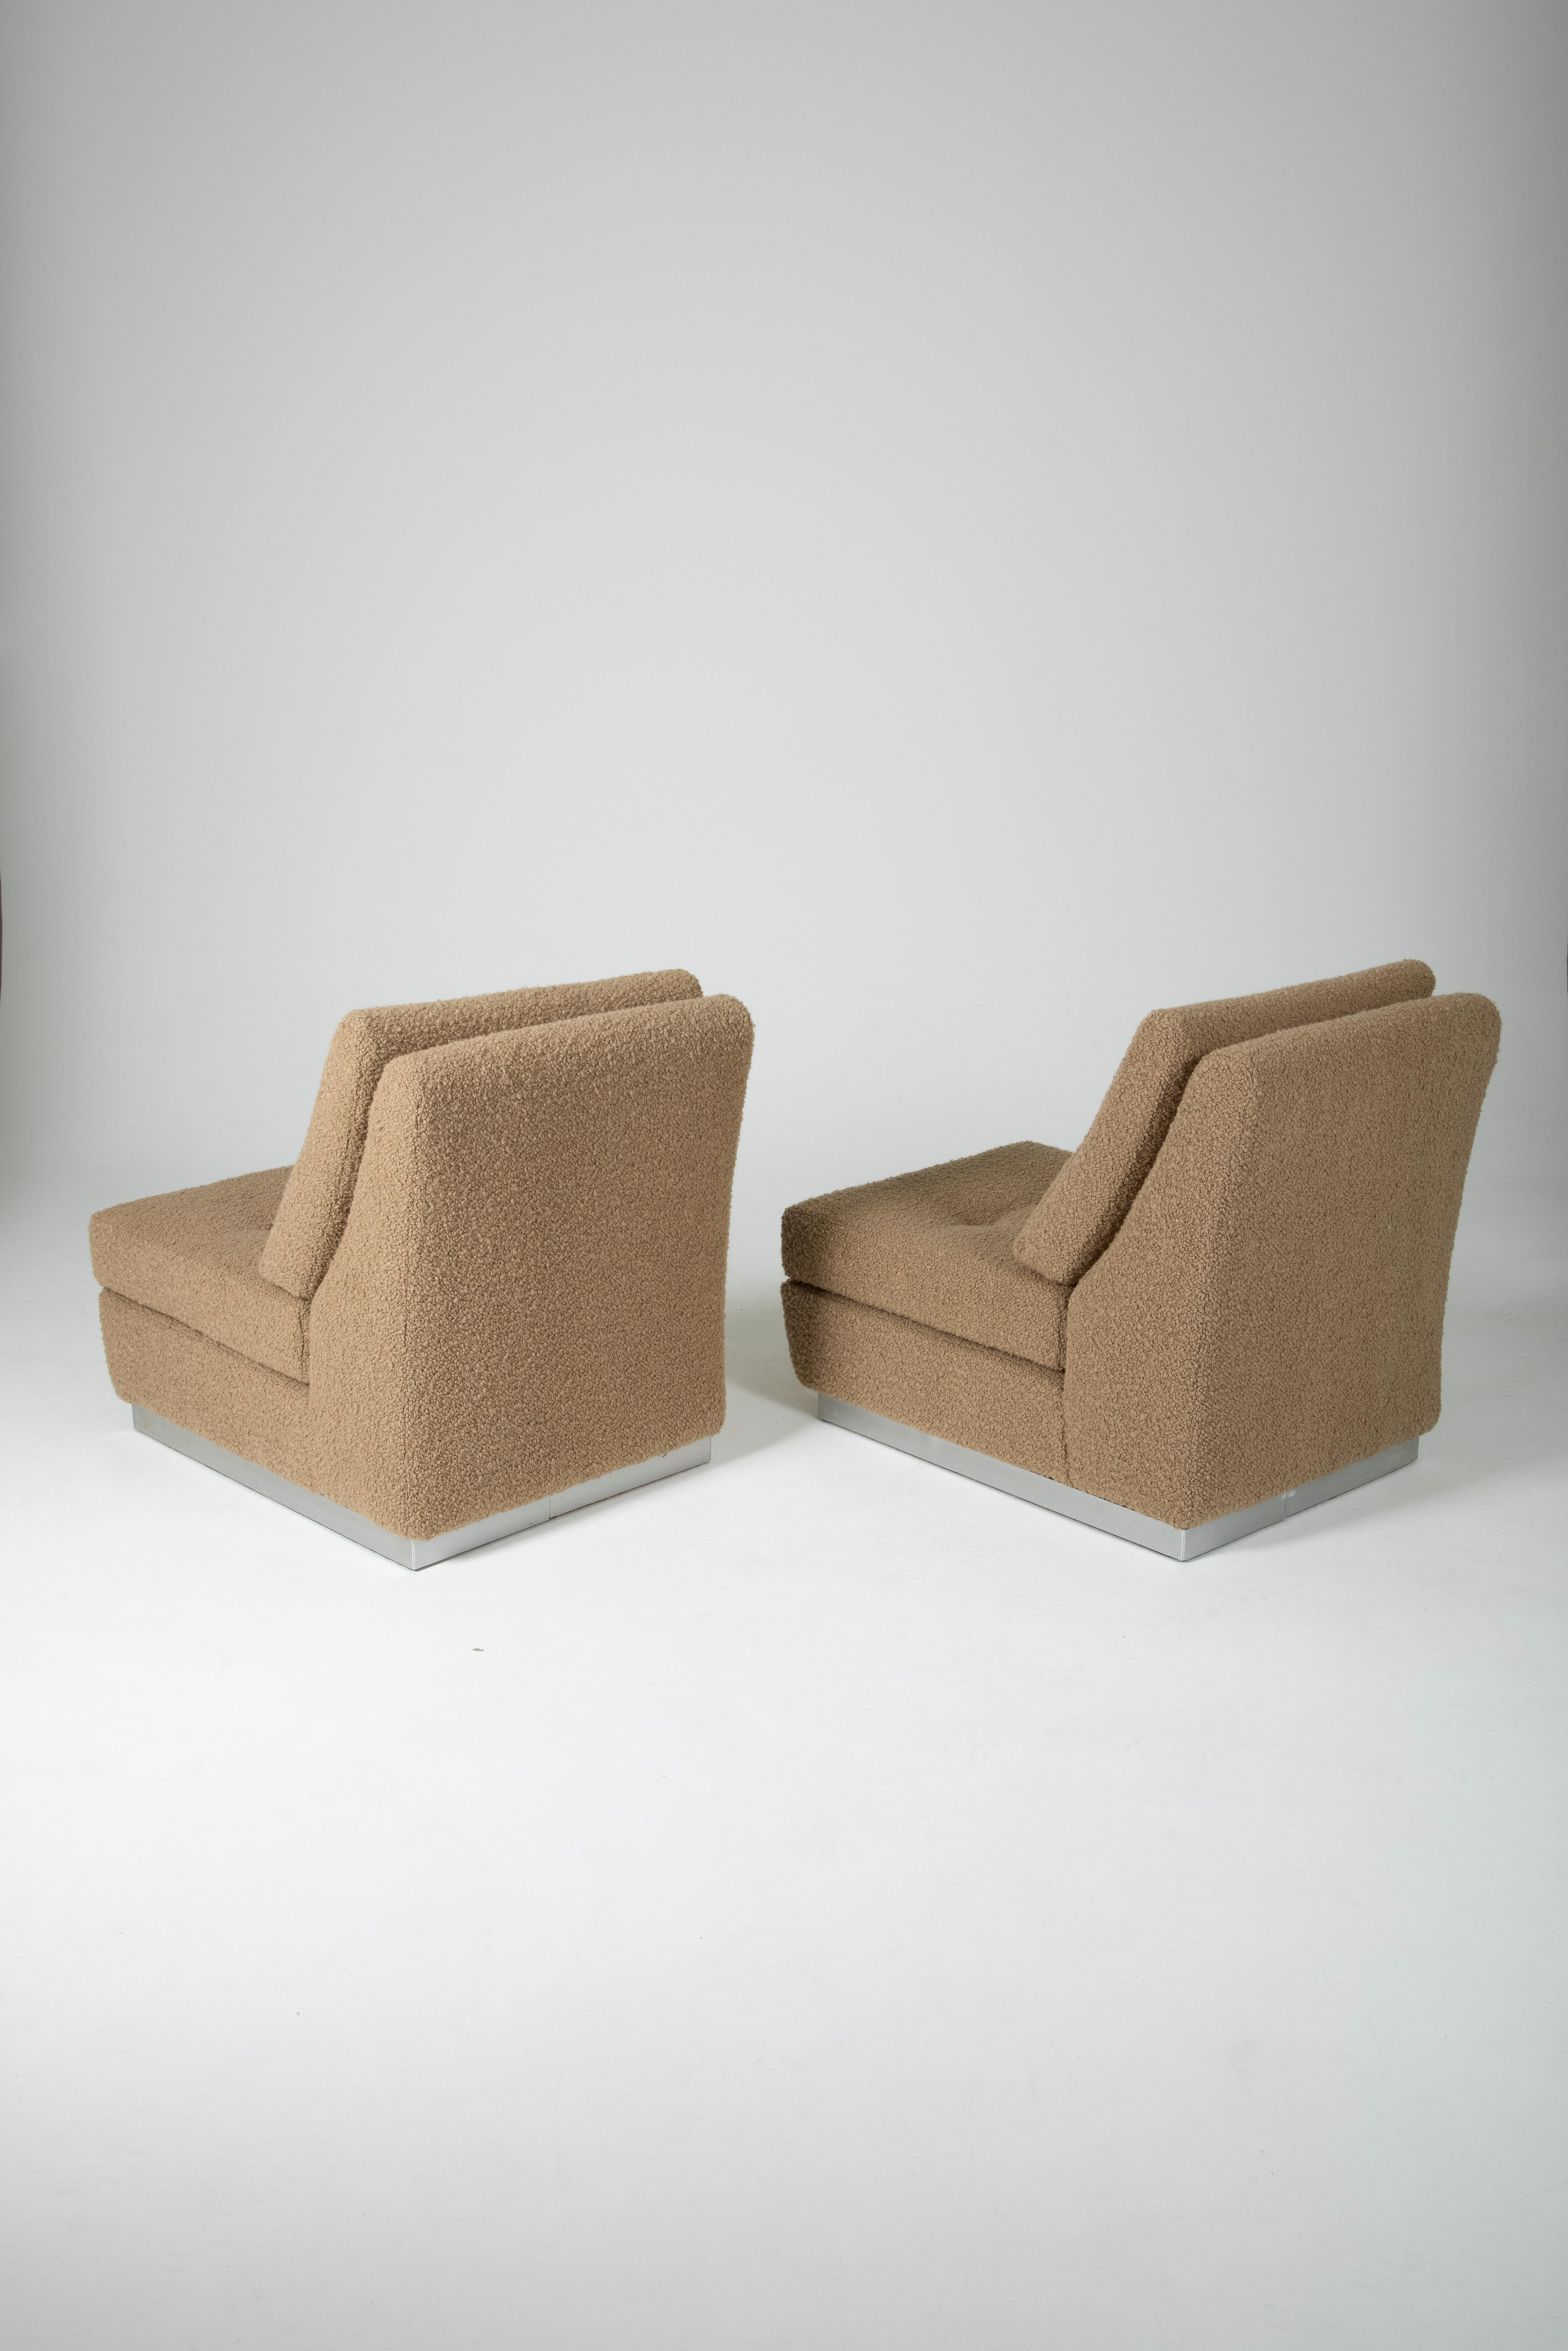 Late 20th Century Pair of Low Chairs Jacques Charpentier, 1970s